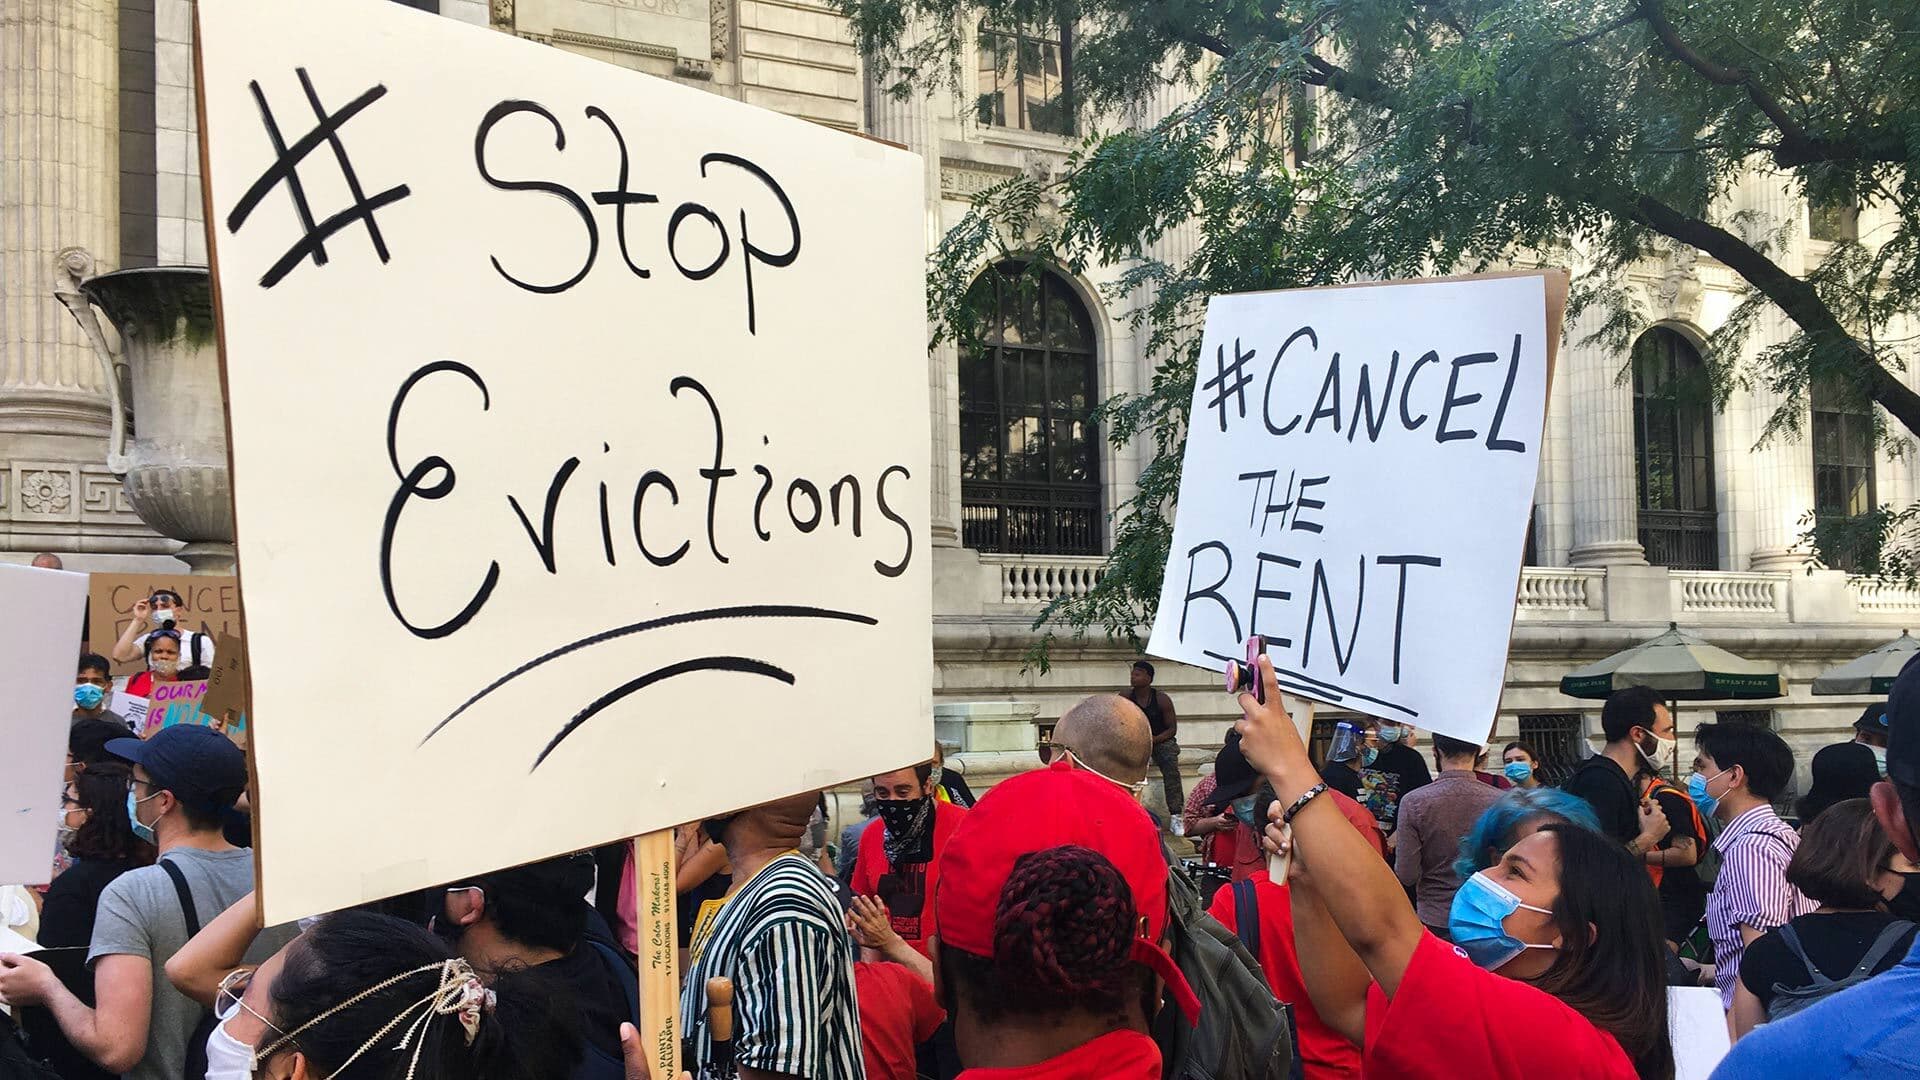 Protesters with signs that read "stop evictions" and "cancel the rent"